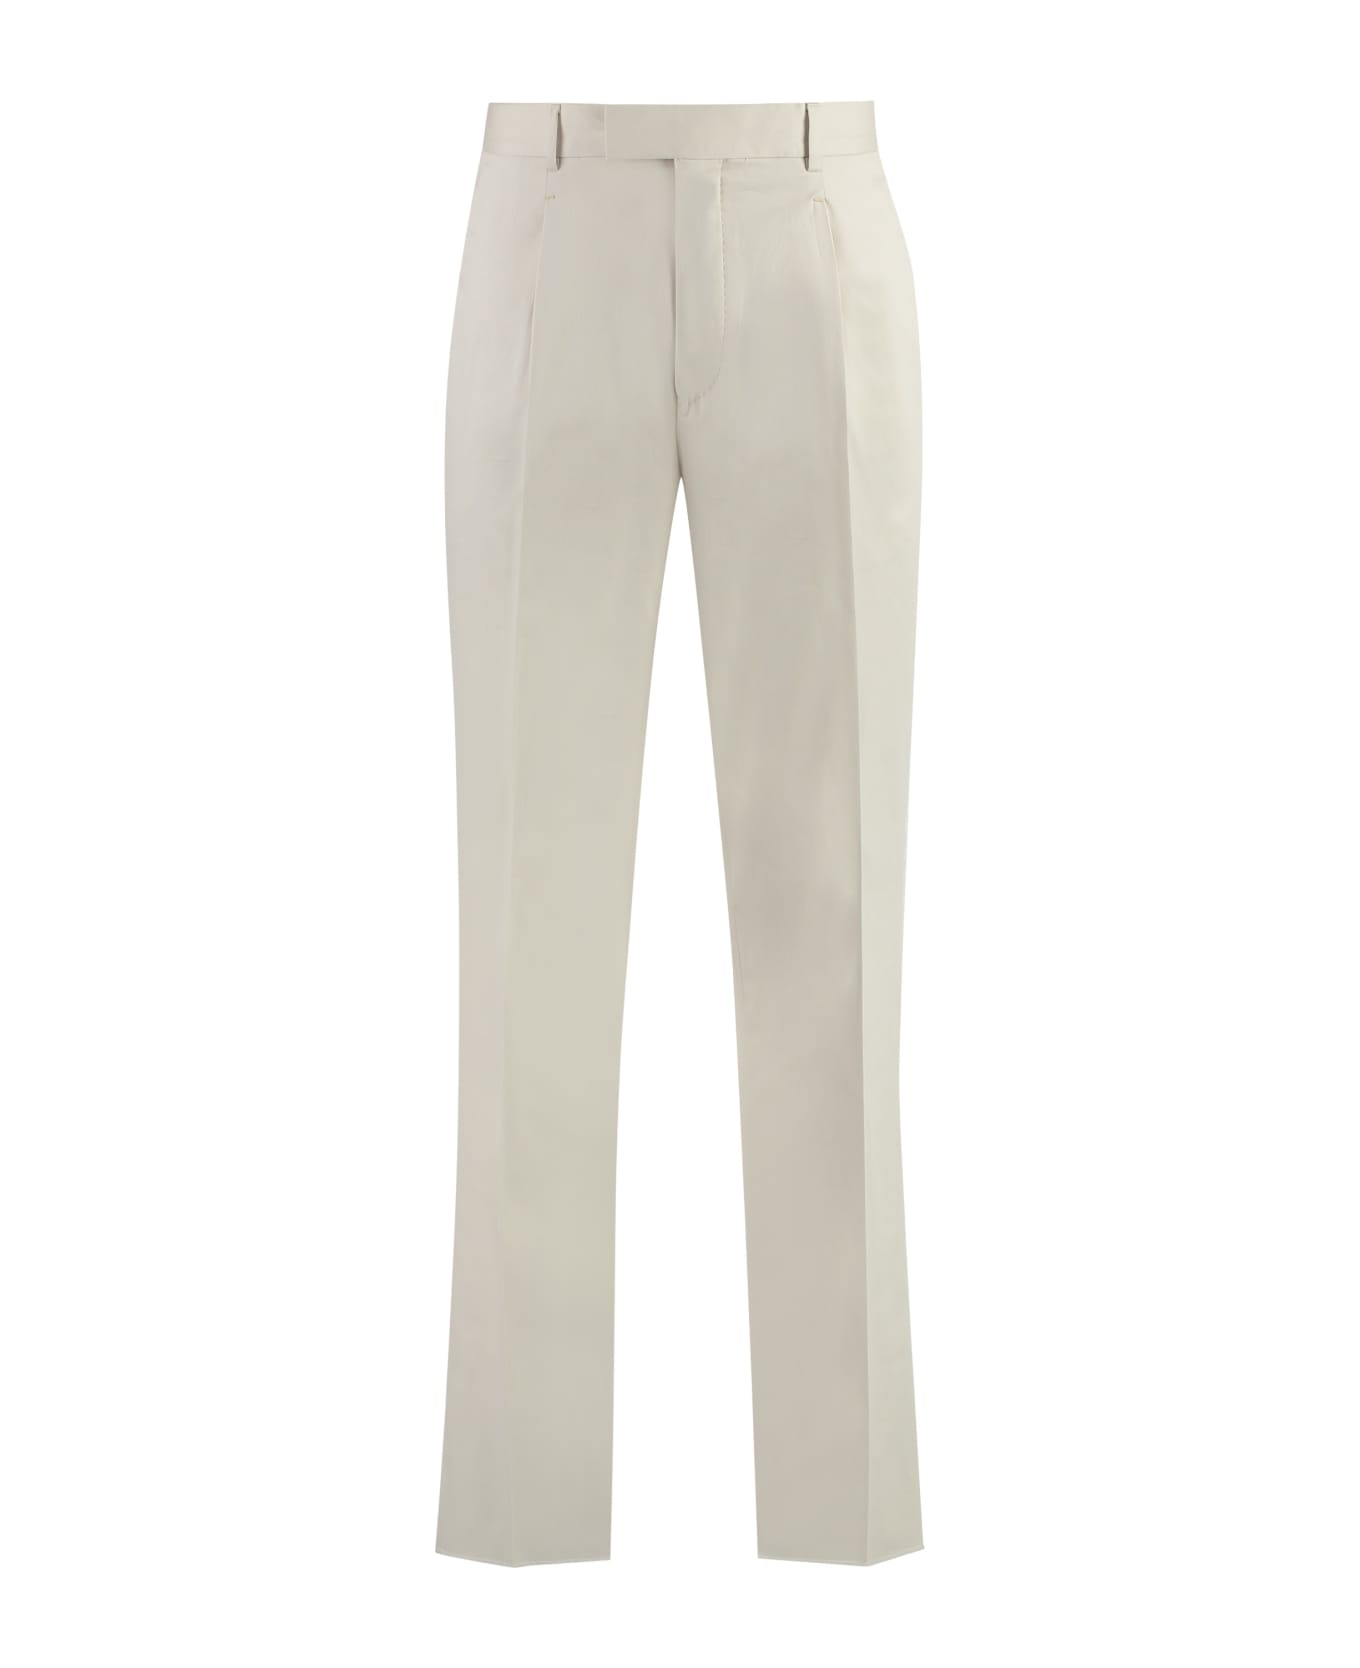 Zegna Stretch Cotton Chino Trousers - Ivory ボトムス